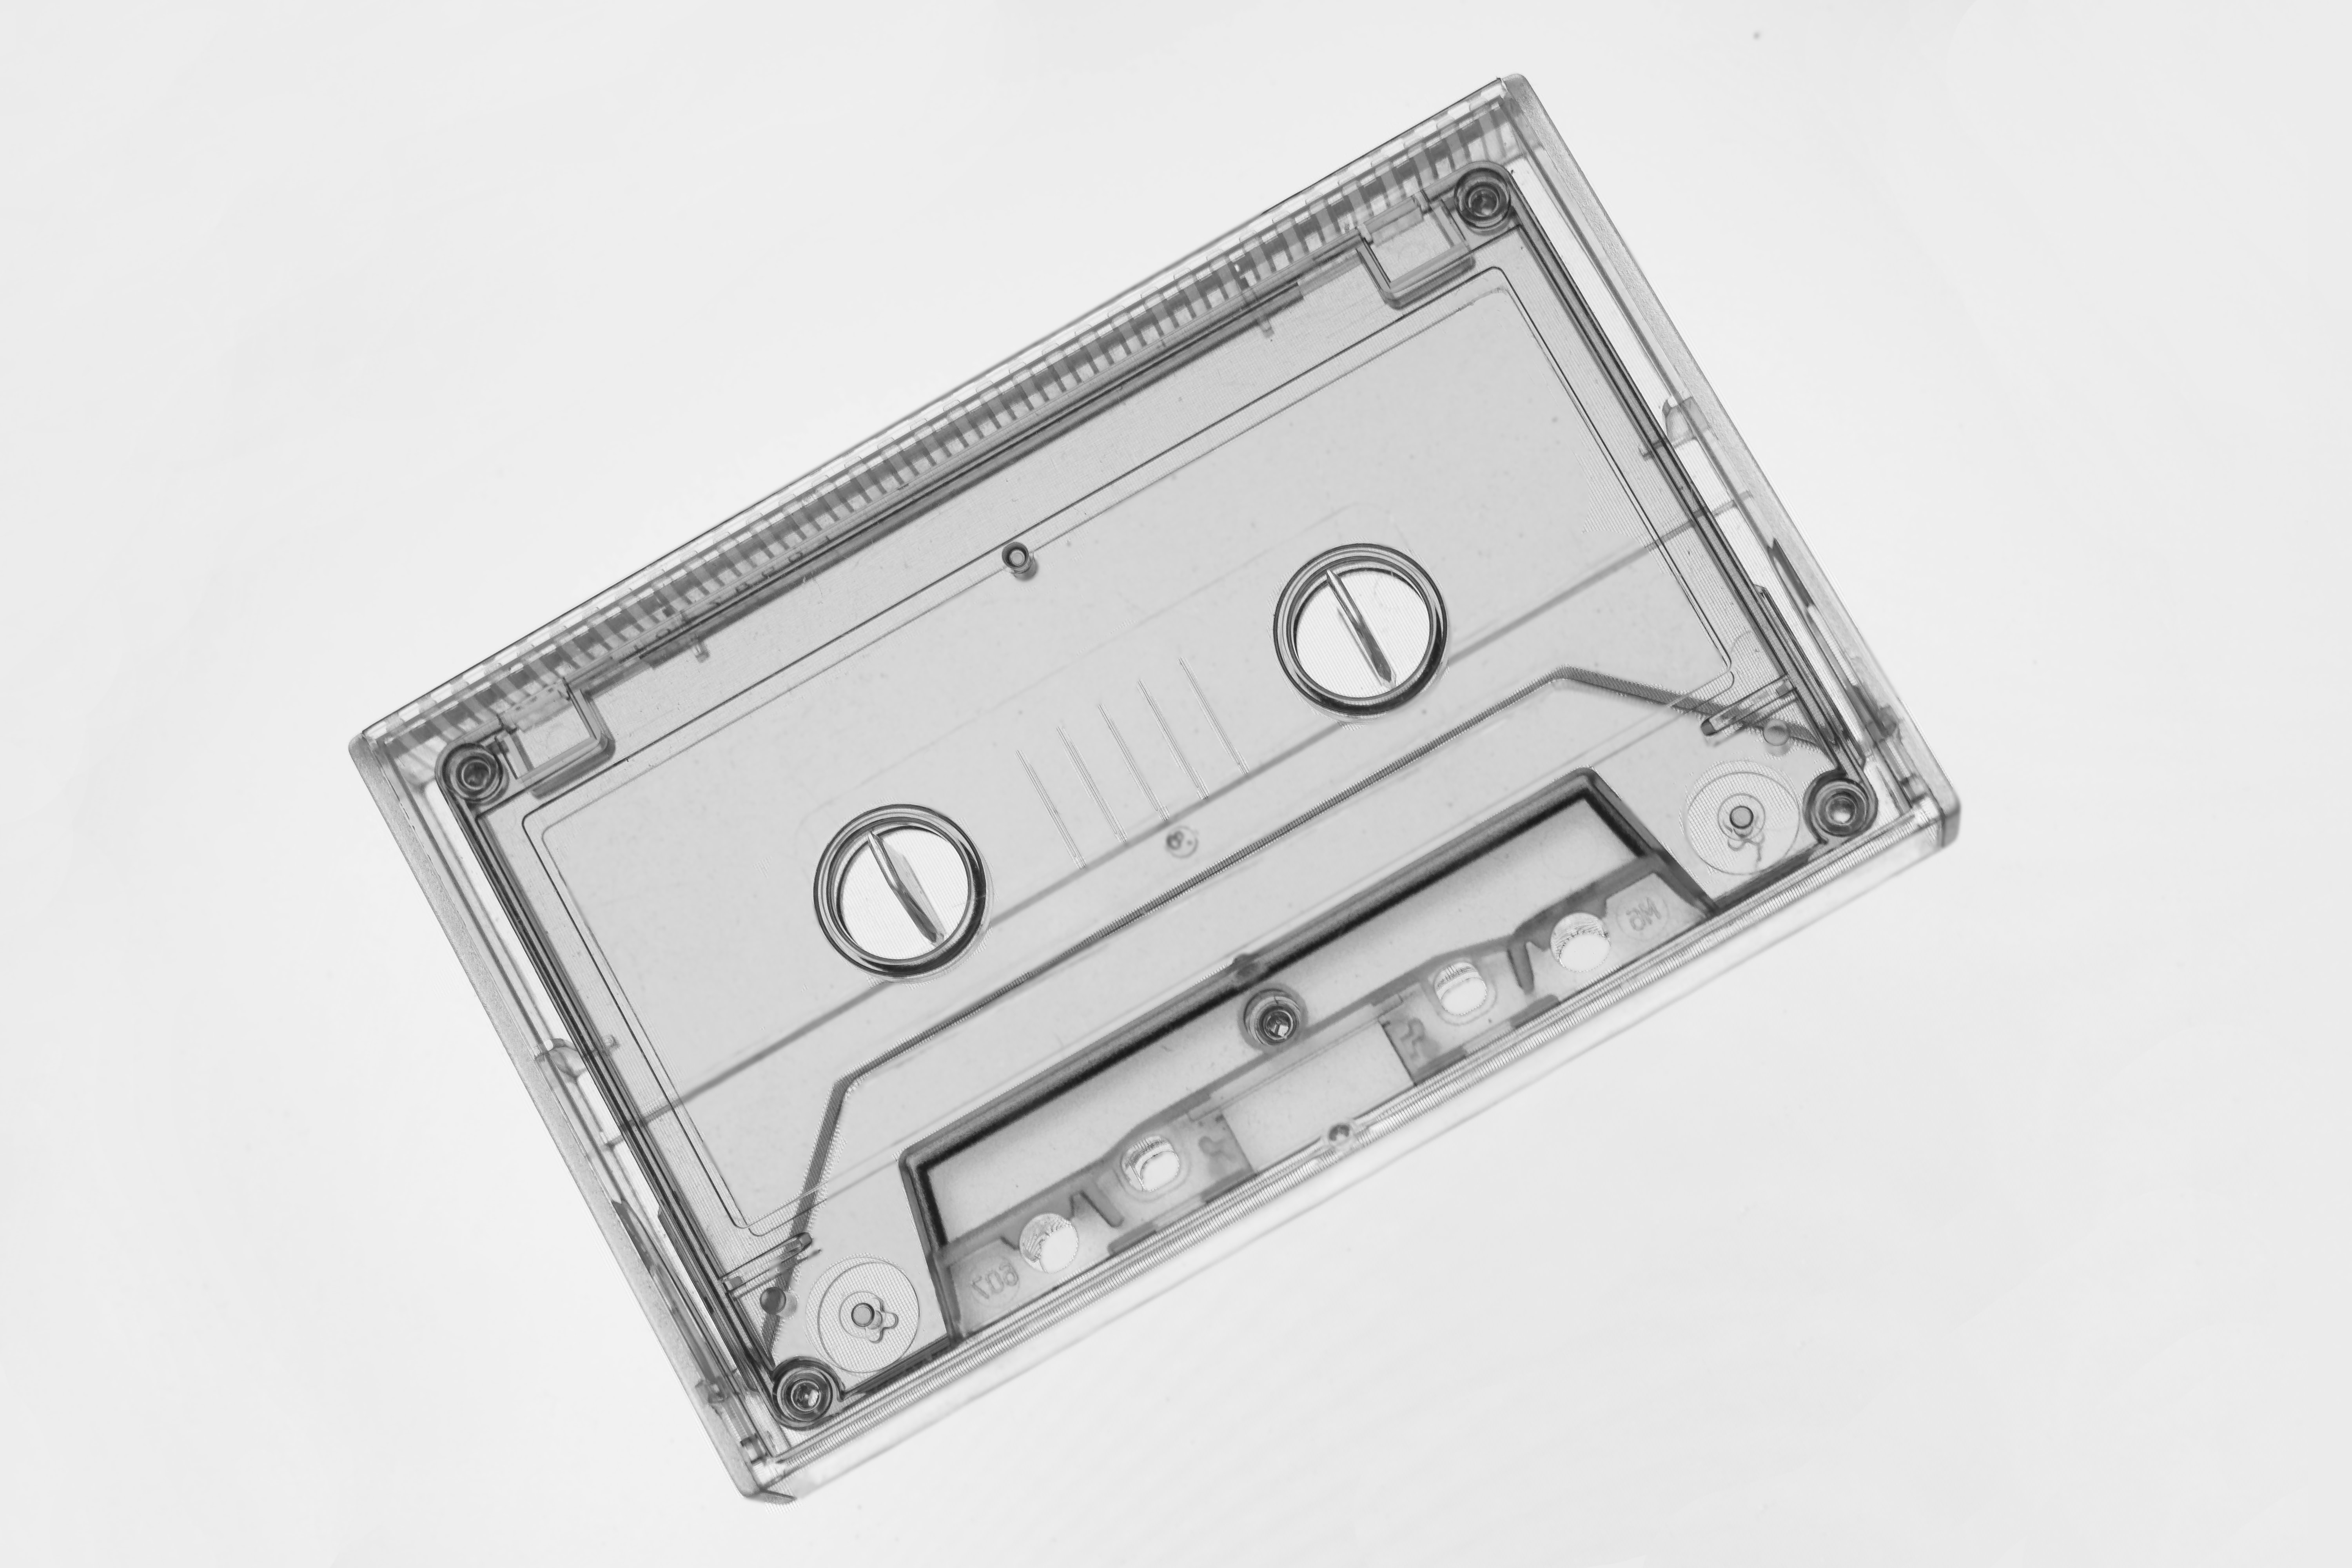 The Unlikely Return Of Cassettes